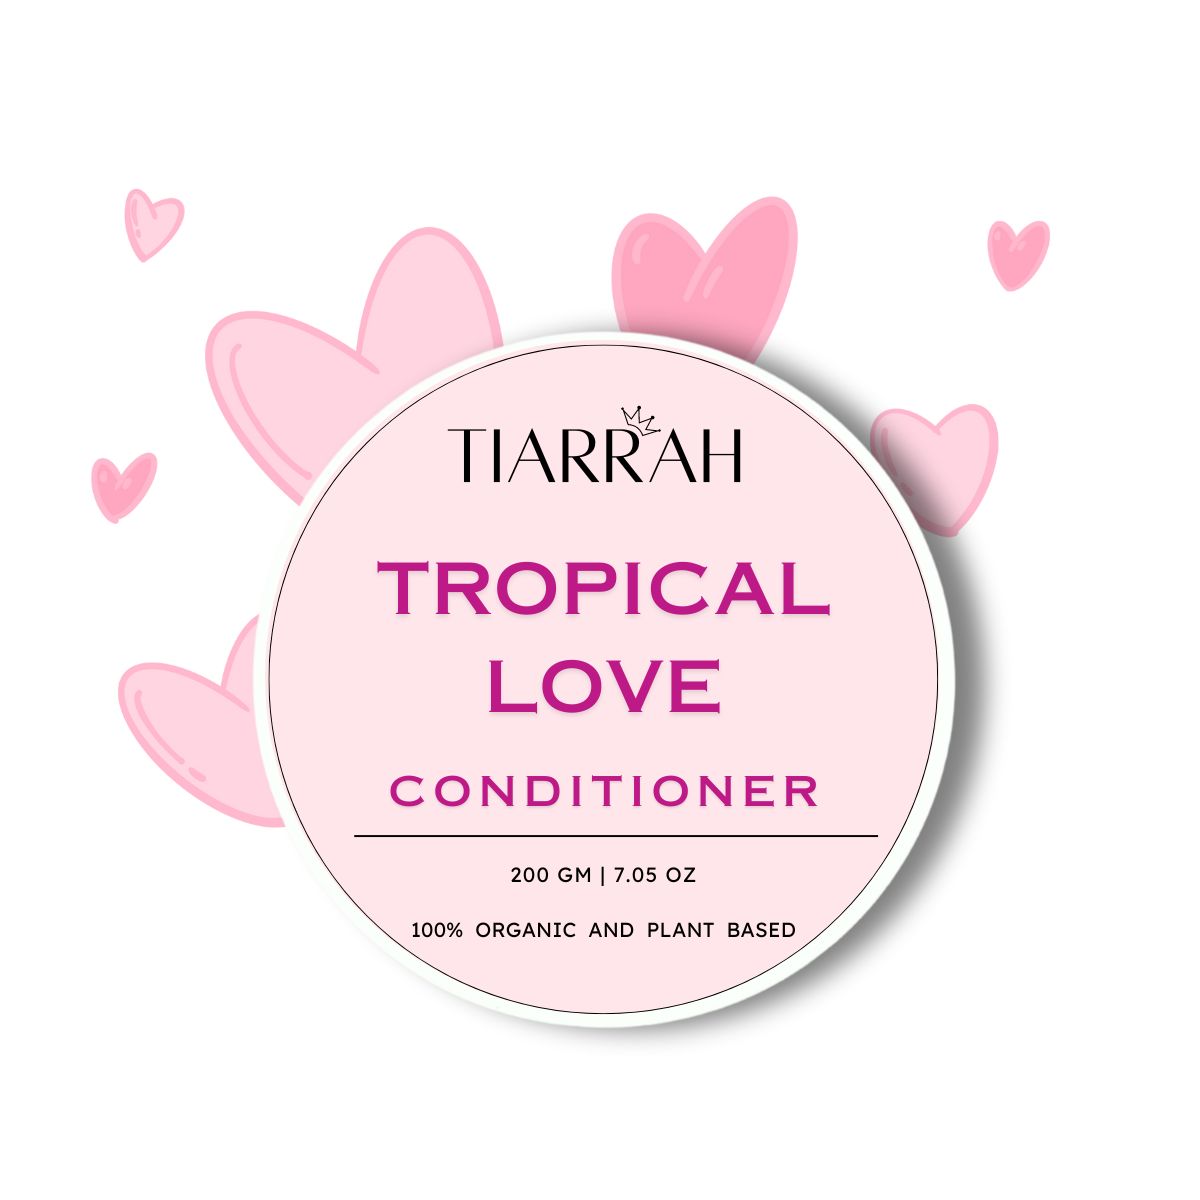 Tiarrah Tropical Love Hair Conditioner: Natural, Organic, Non-Toxic - The Luxury Bath and Body Care Shop